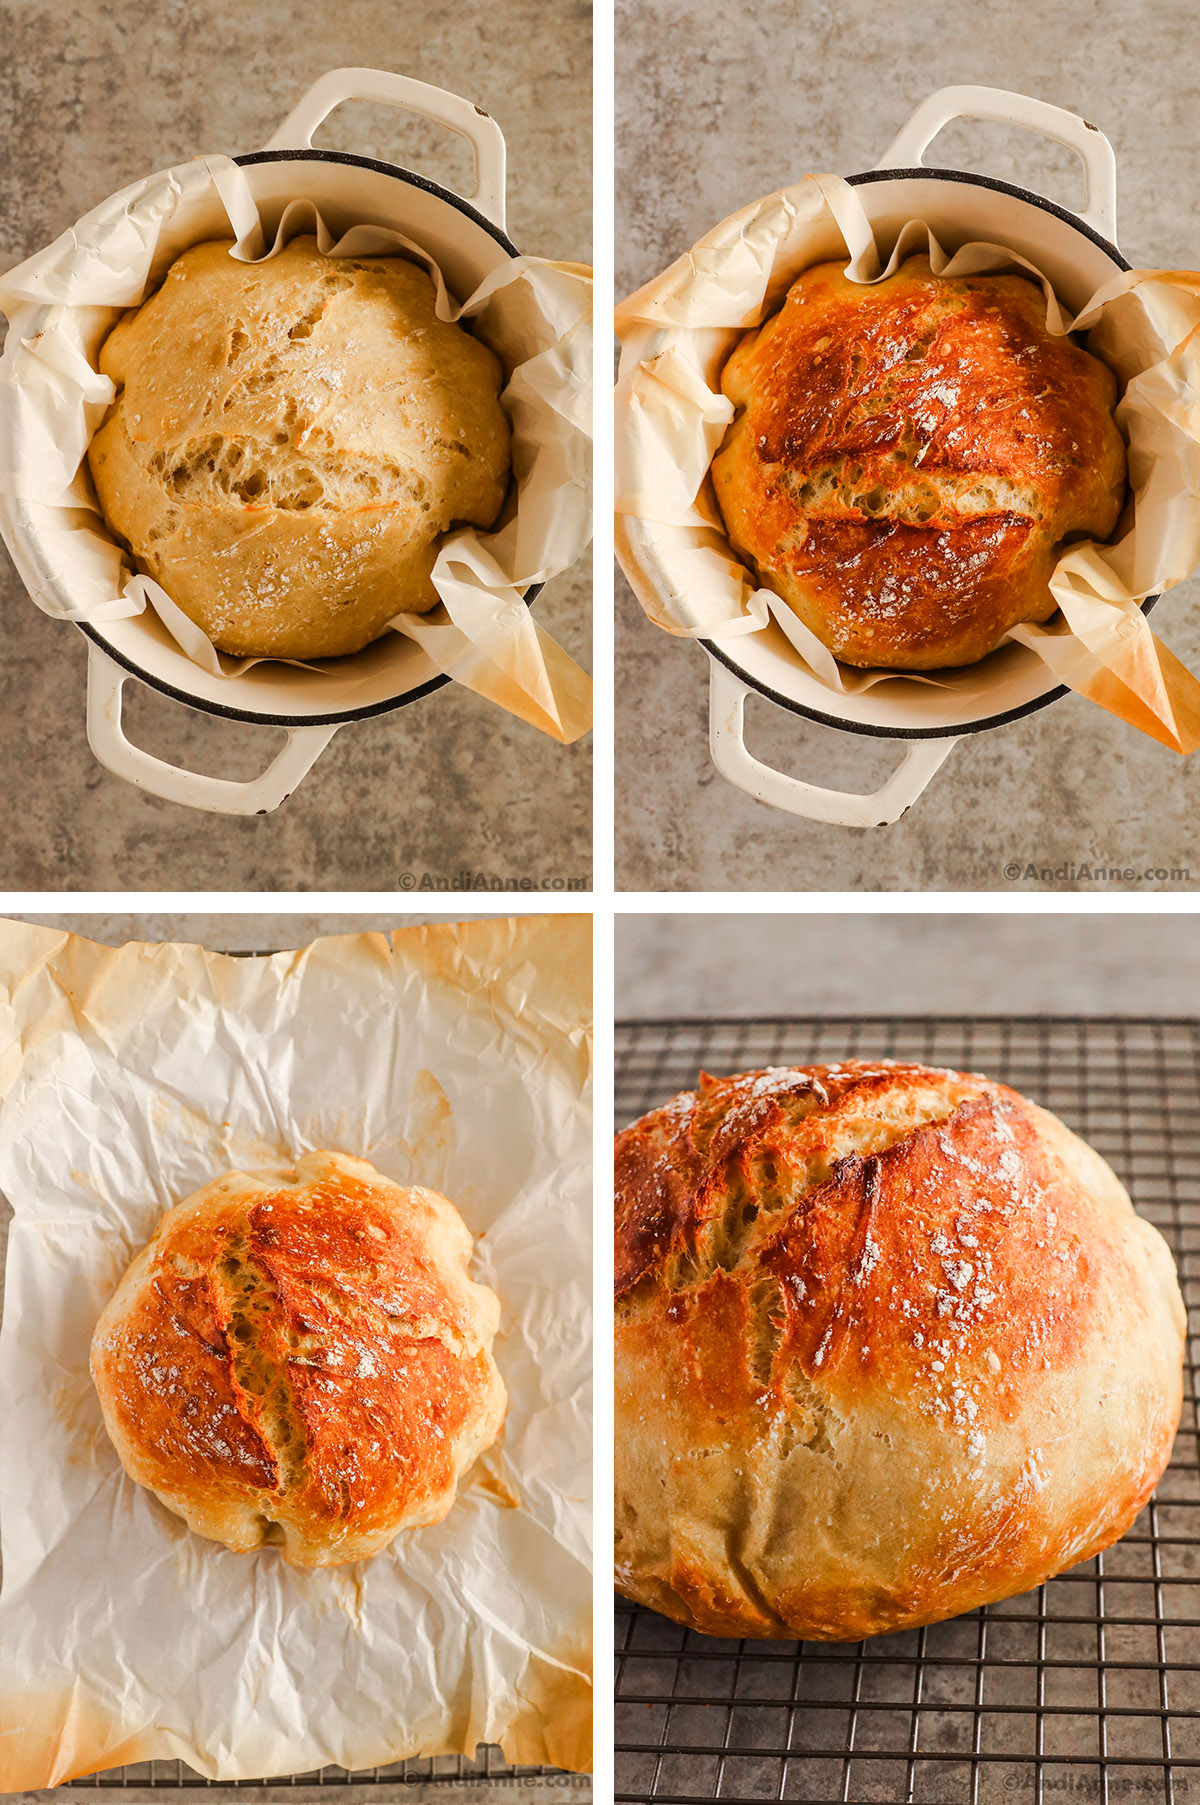 A white dutch oven with bread loaf first not fully cooked, second more cooked. Third image is loaf on parchment, fourth image is loaf on rack.